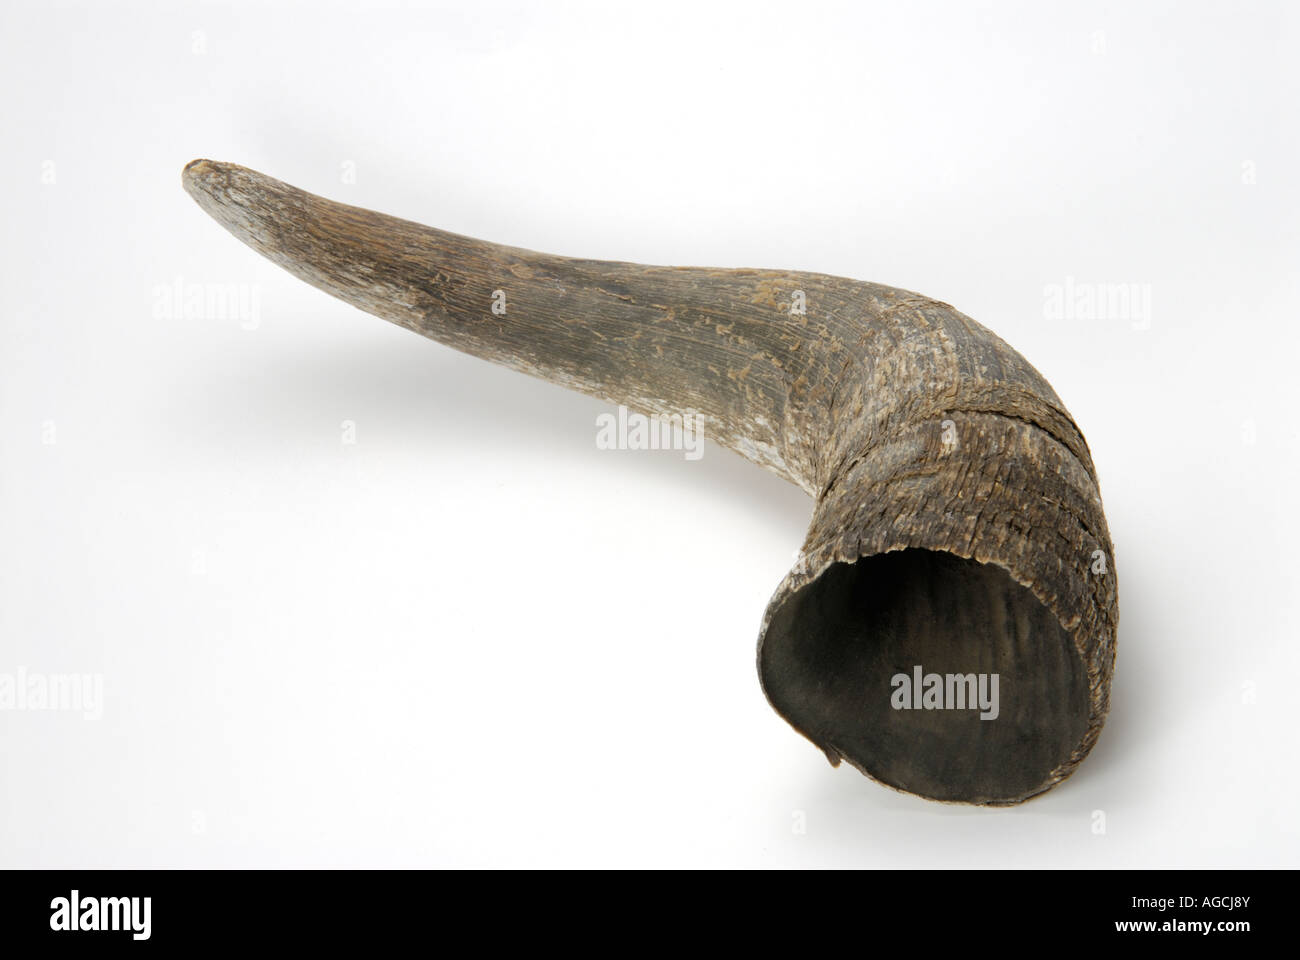 Horn from an American Bison, Bison bison Stock Photo